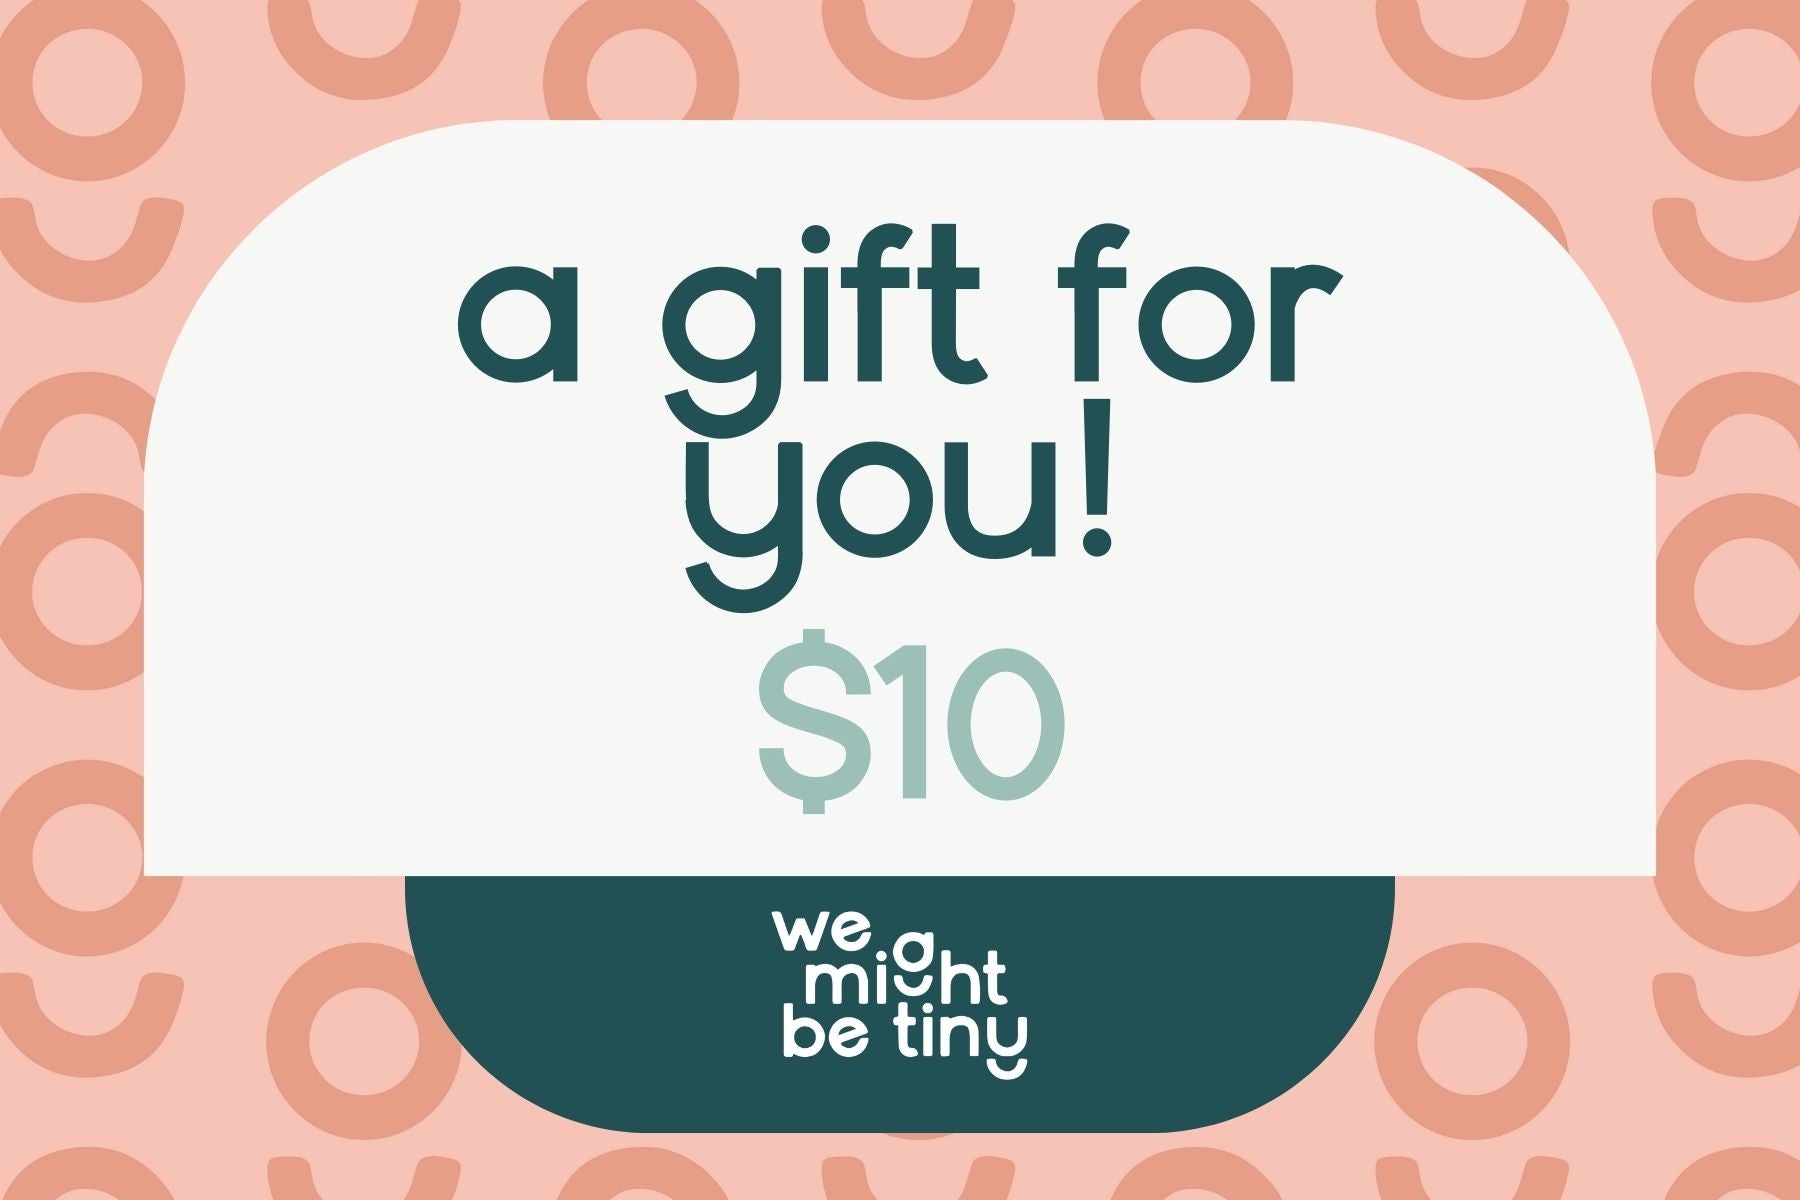 Gift Voucher - We Might Be Tiny $10